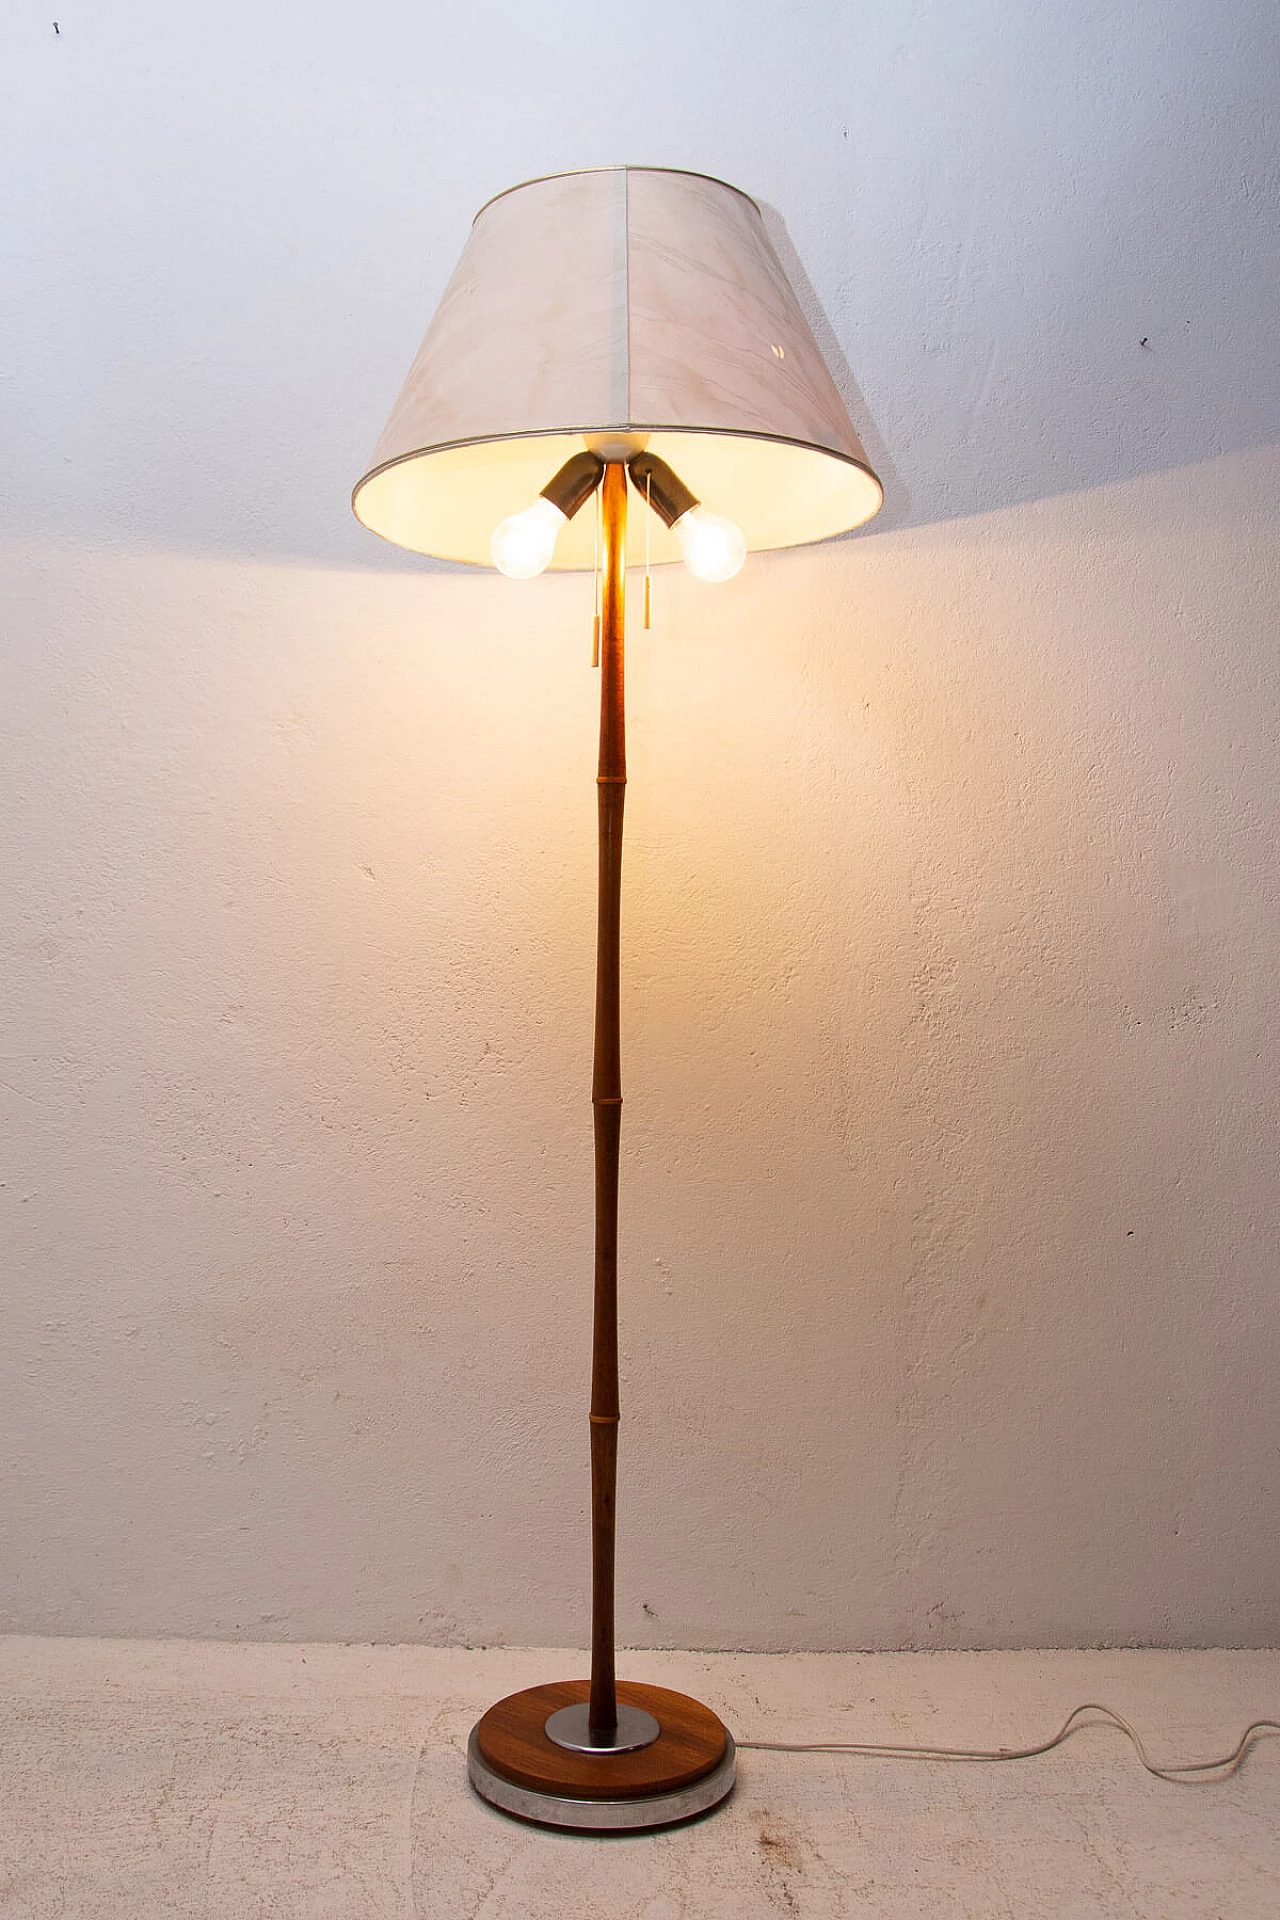 Floor lamp with wooden frame, 1960s 1364097